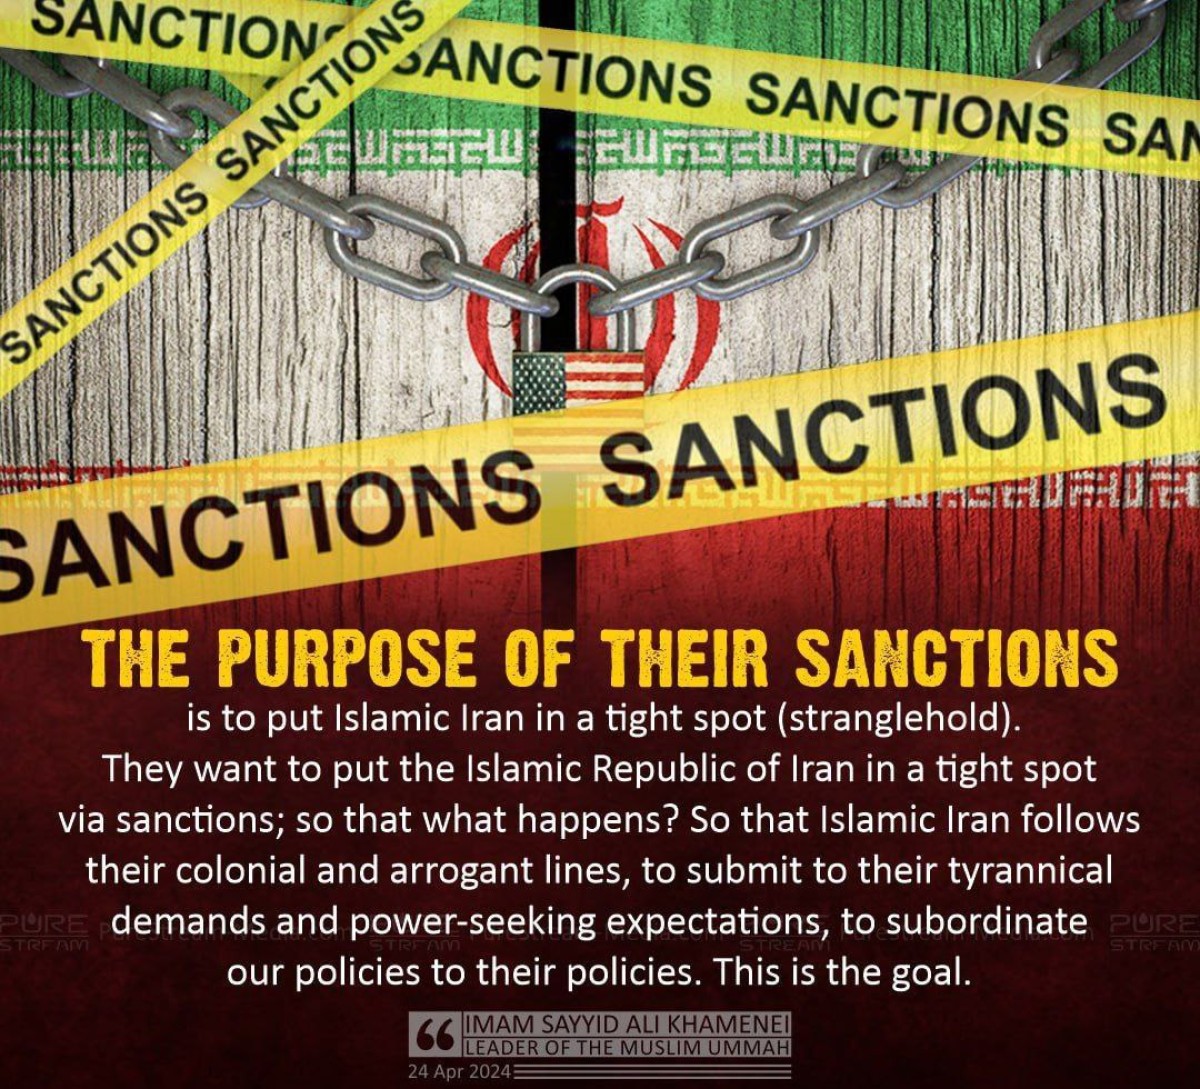 The purpose of their sanctions